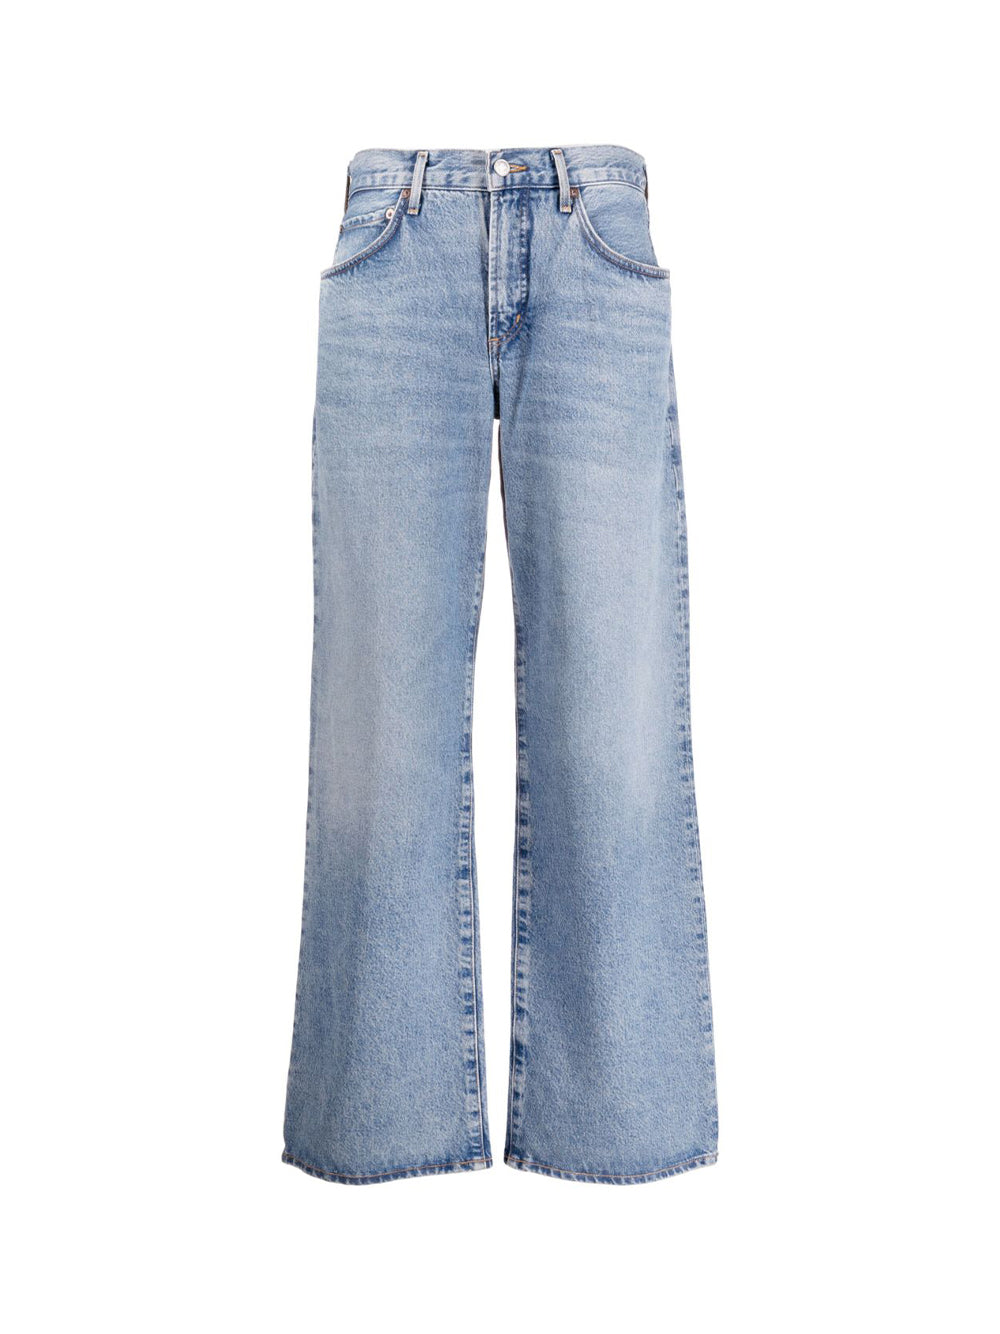 Renounce Jeans Trousers